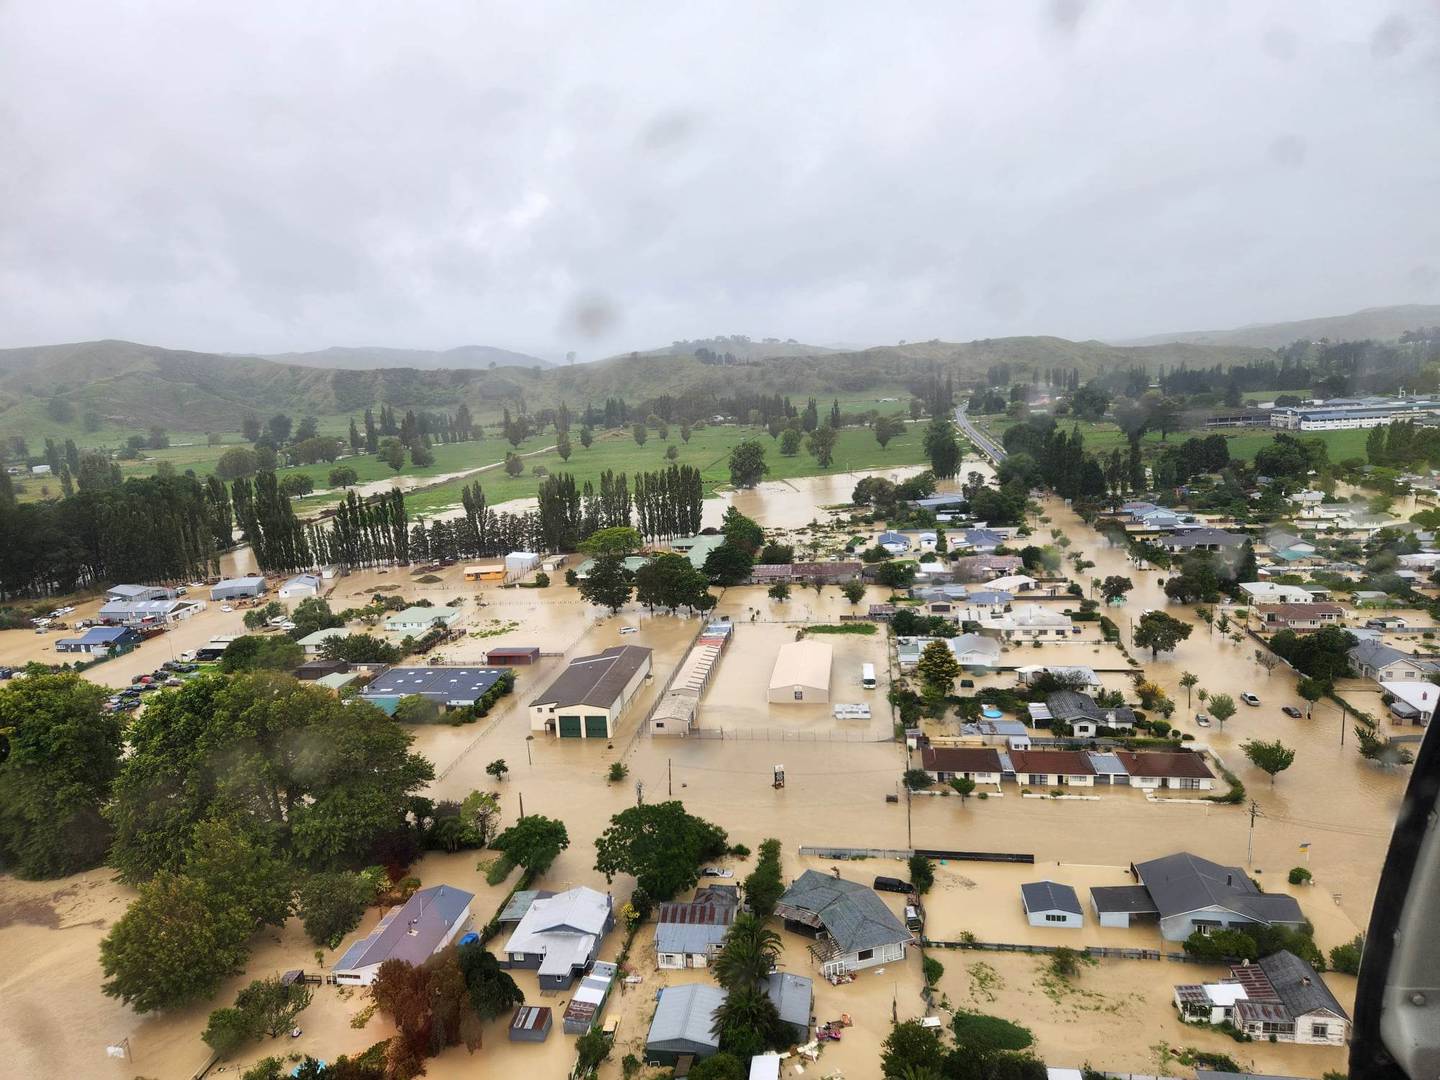 Aerial photographs reveal the extent of damage in storm-ravaged Wairoa. Photo / Hawke's Bay Civil Defence